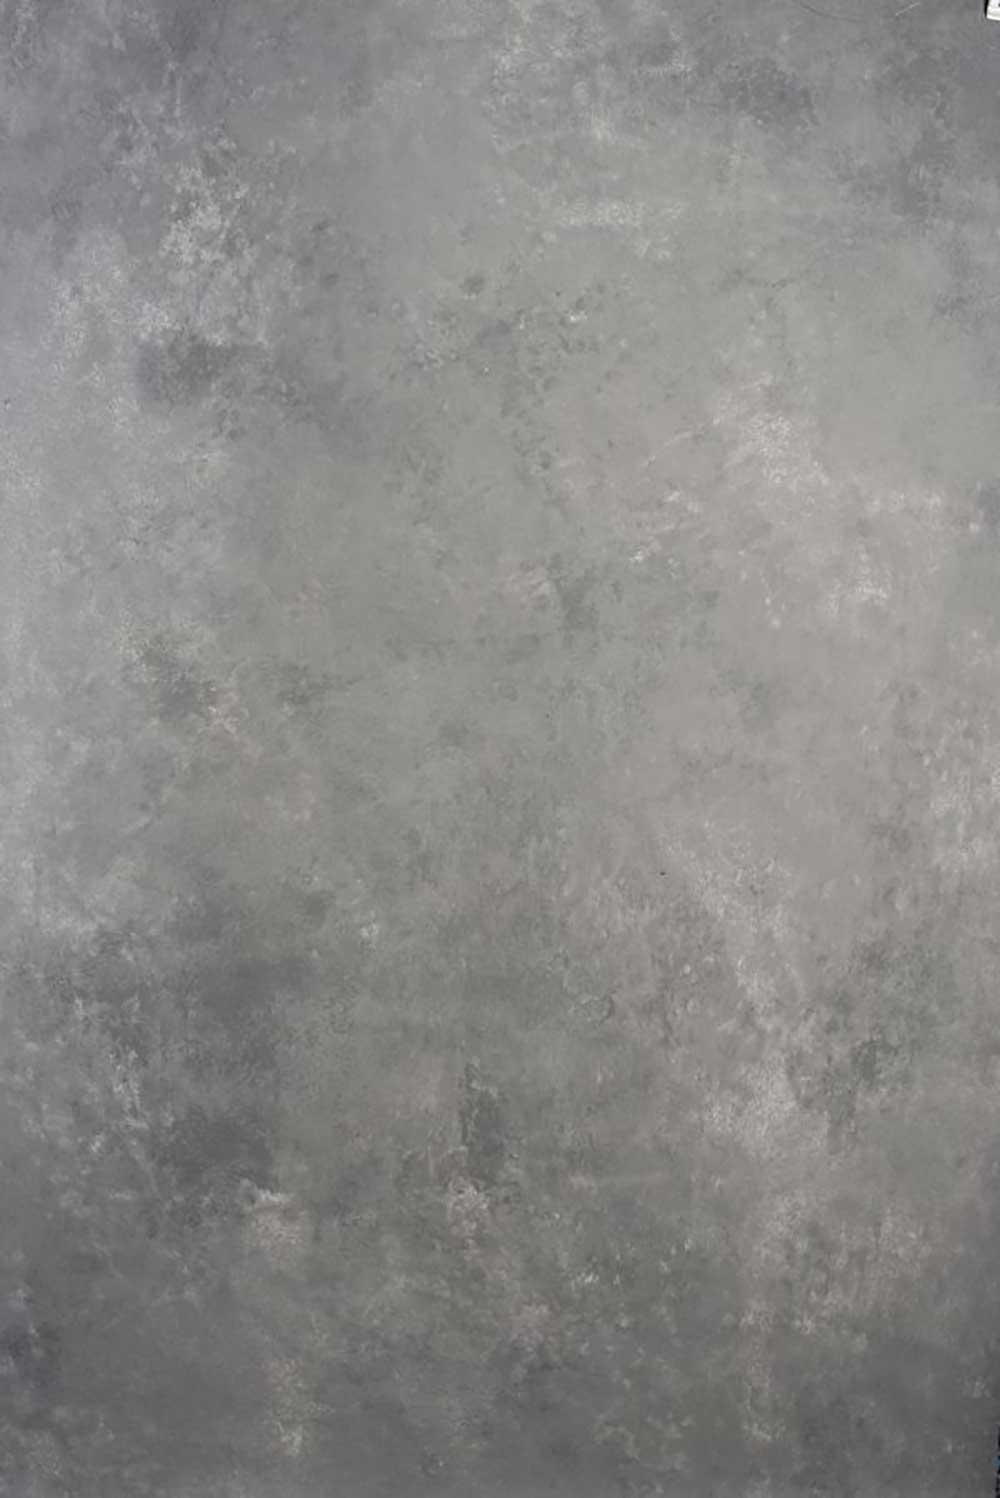 Clotstudio Abstract Gray Mid Textured Hand Painted Canvas Backdrop #clot106